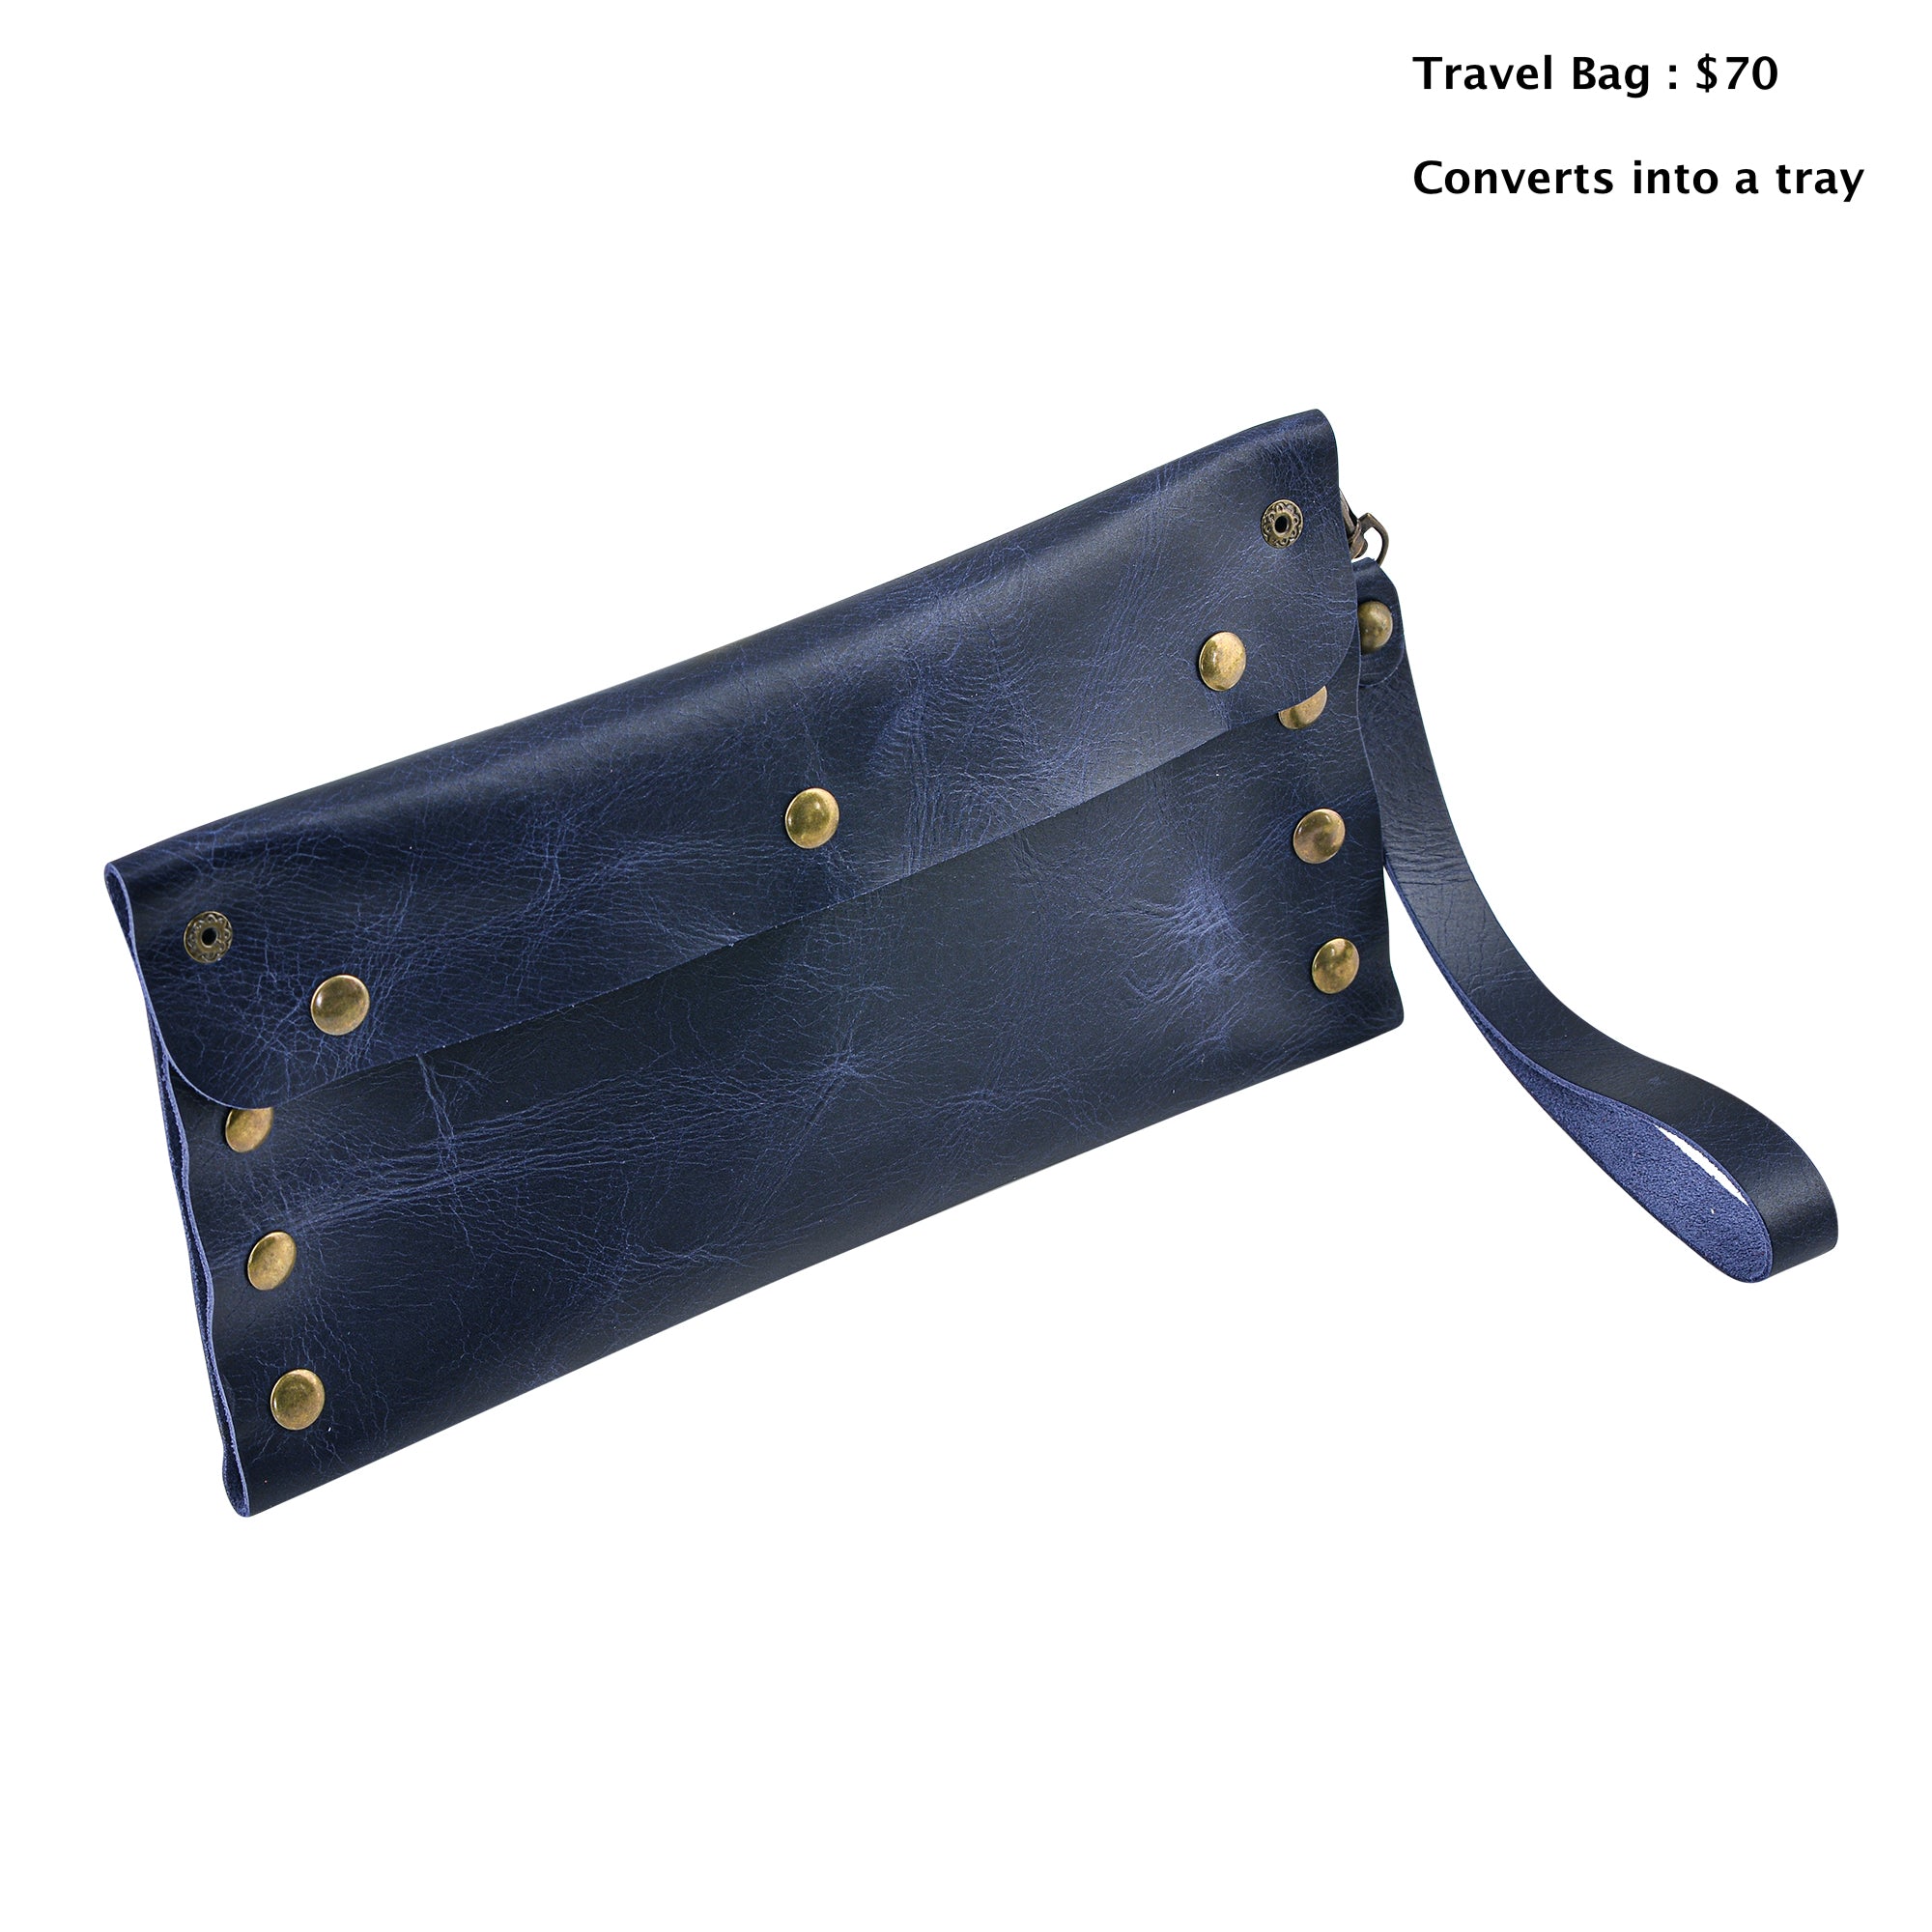 Leather Convertible Travel Bag